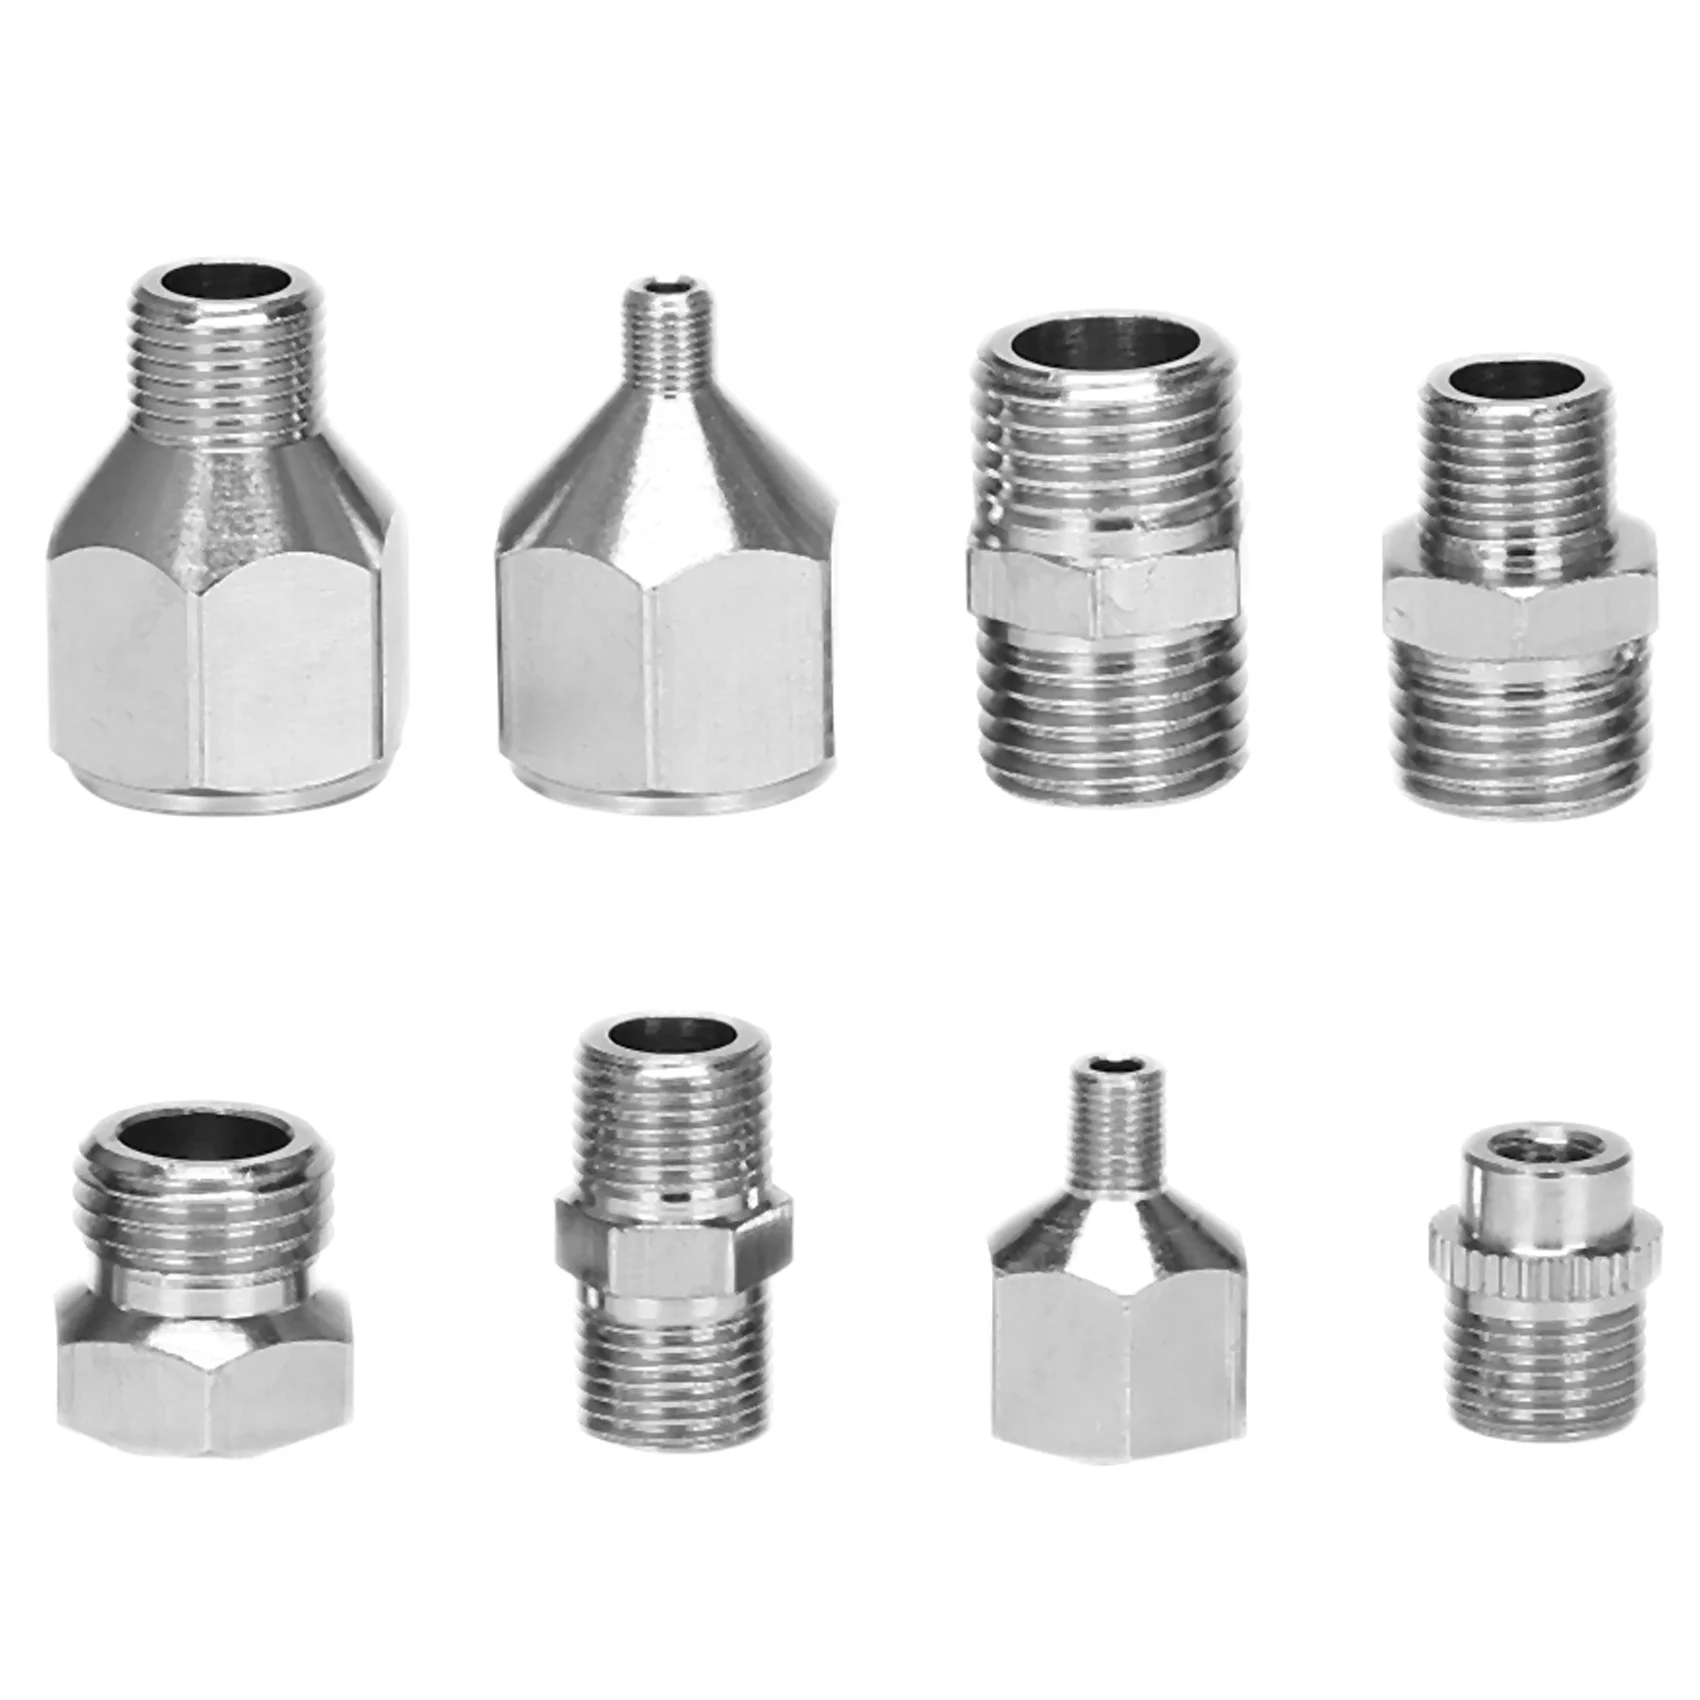 

8 Pieces Airbrush Flexible Adapter Fitting Connector Set for Compressor and Airbrush Hose